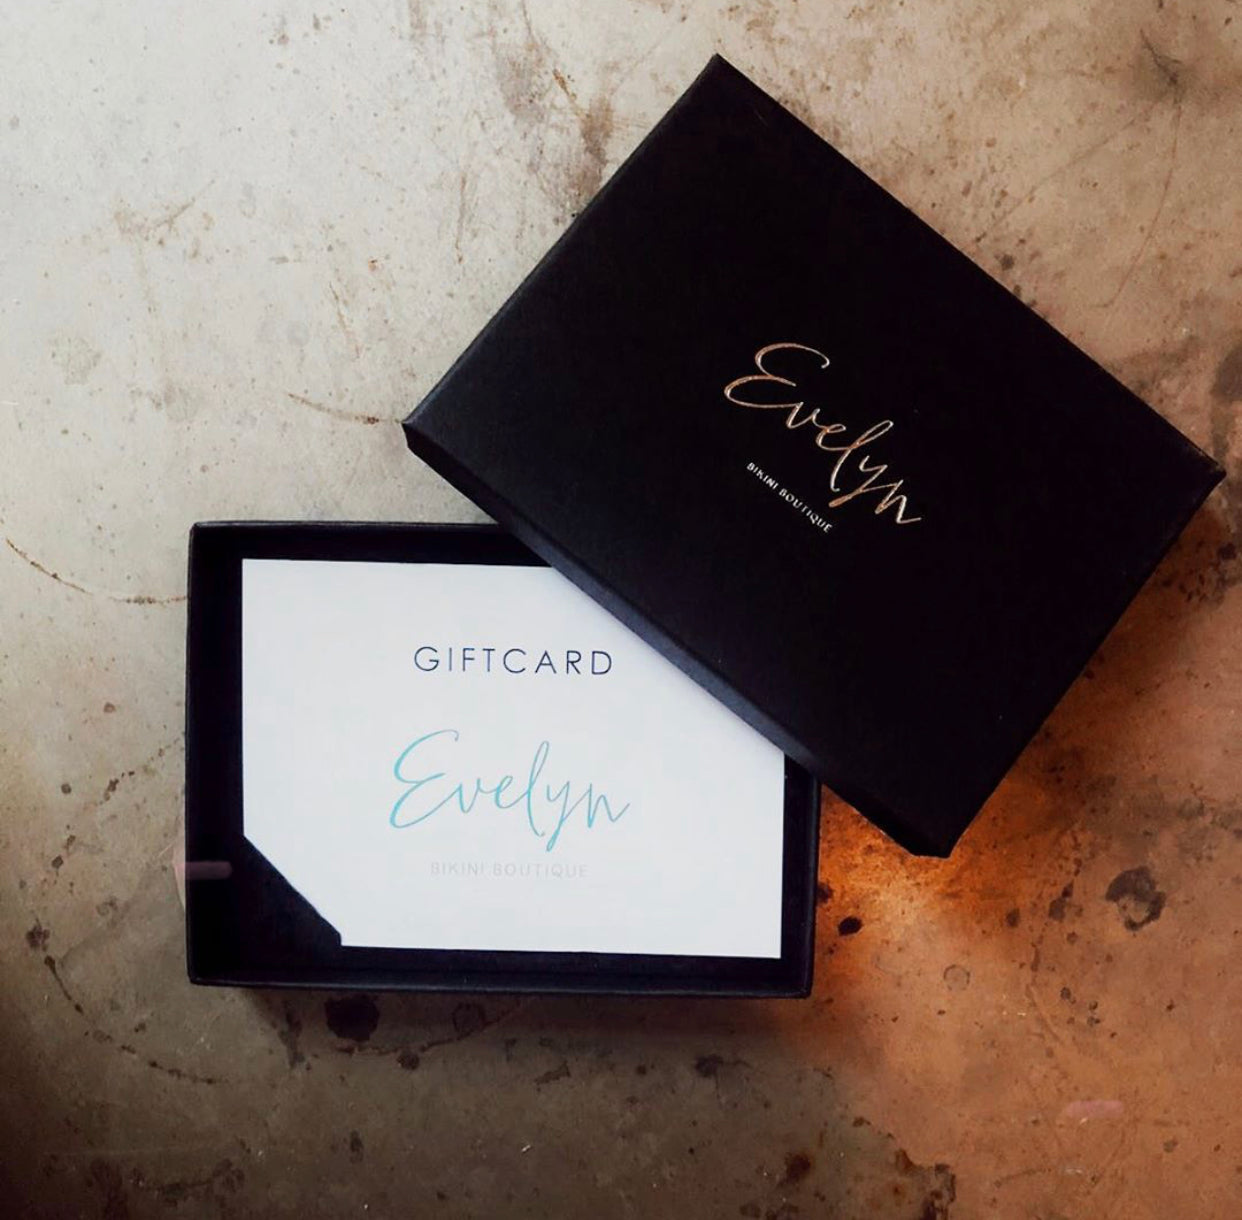 Evelyn Gift Card